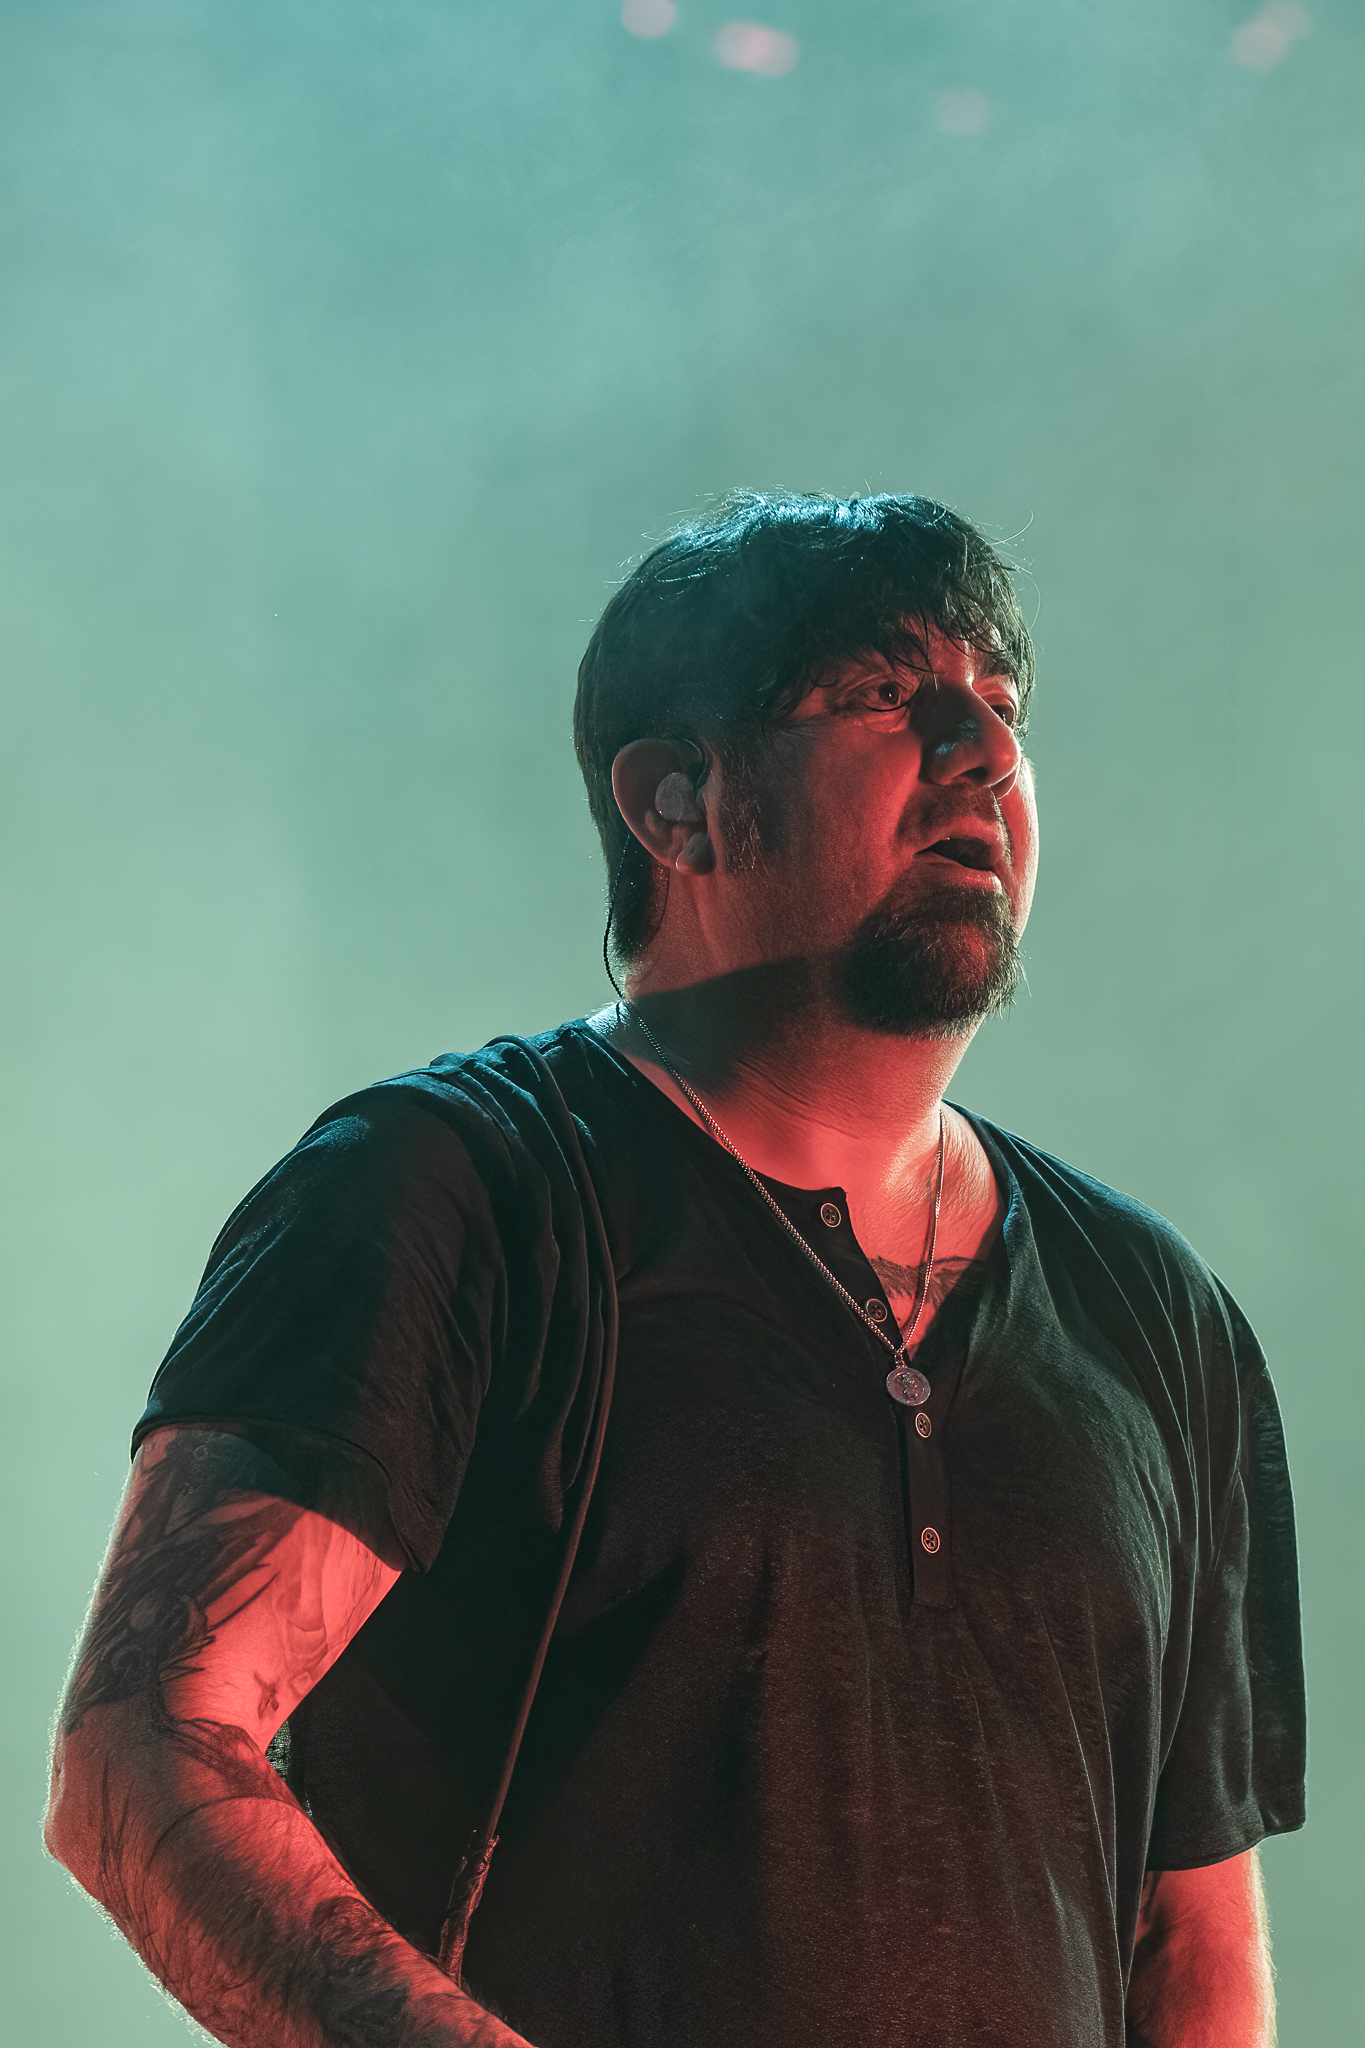 Deftones perform at Moda Center Theater of the Clouds in Portland, OR on April 14, 2022.